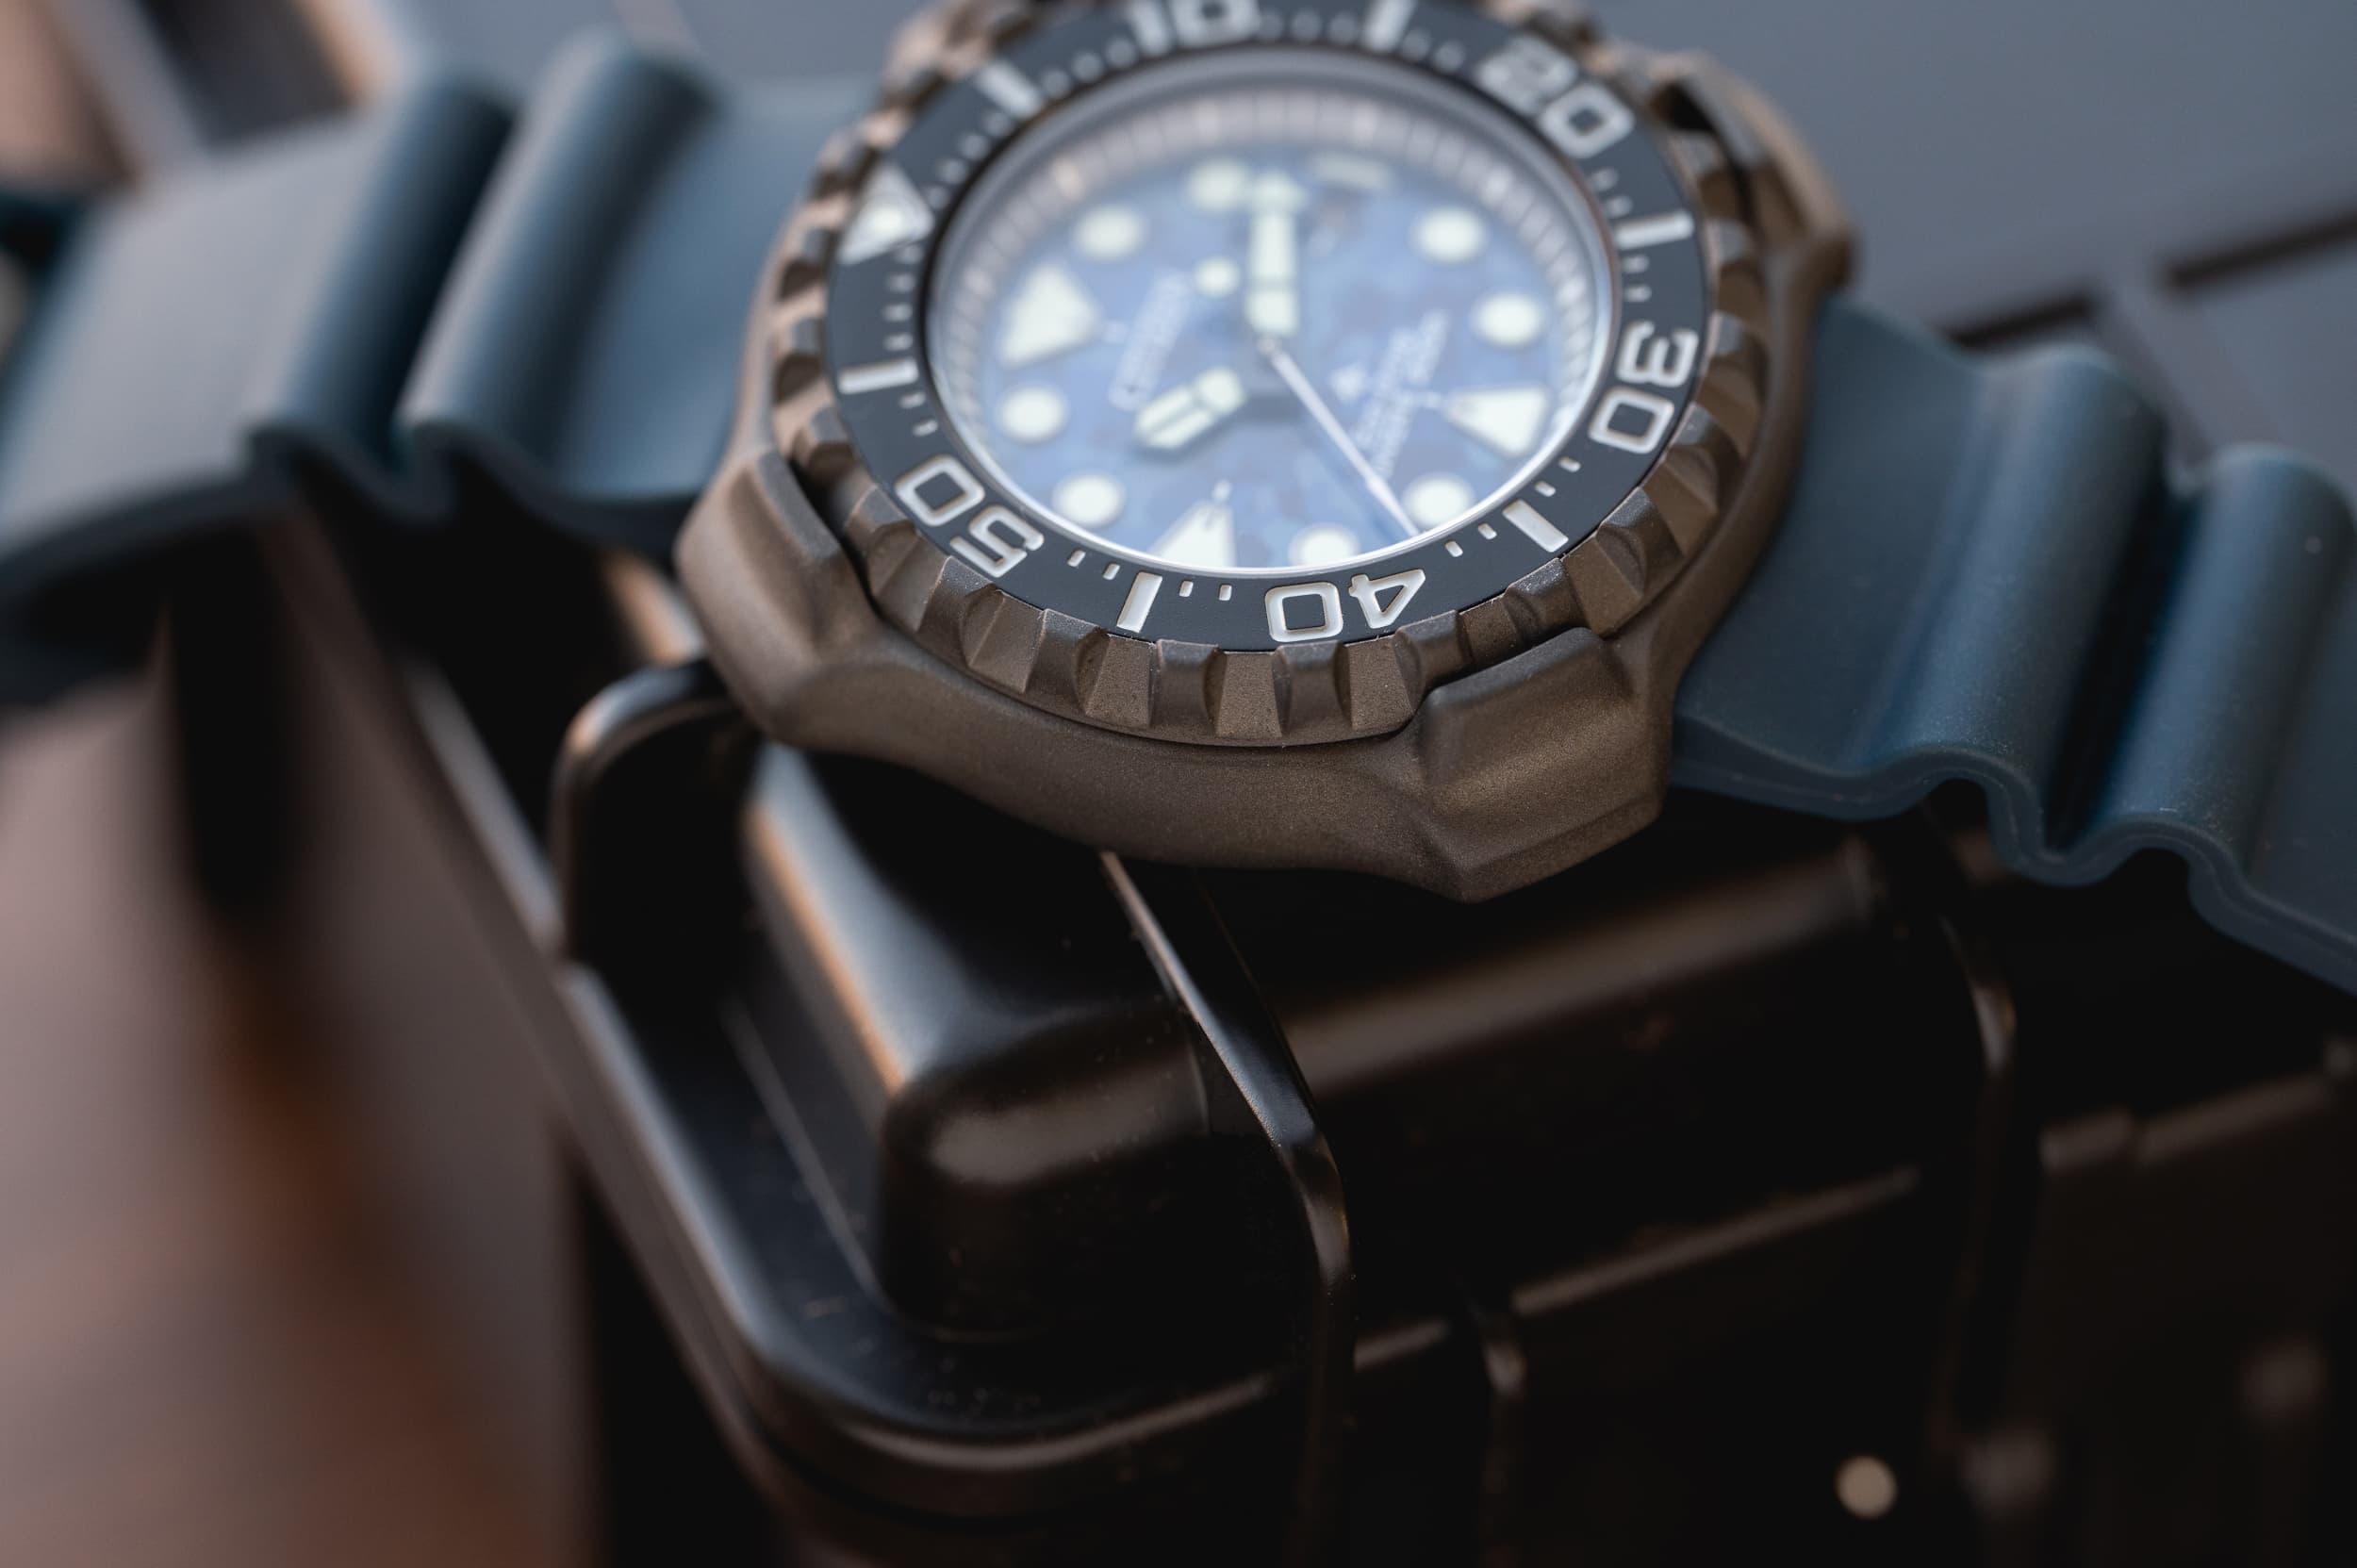 Diver Review: Wound Worn Approachable Promaster The BN0227-09L & - Citizen Yet Assertive